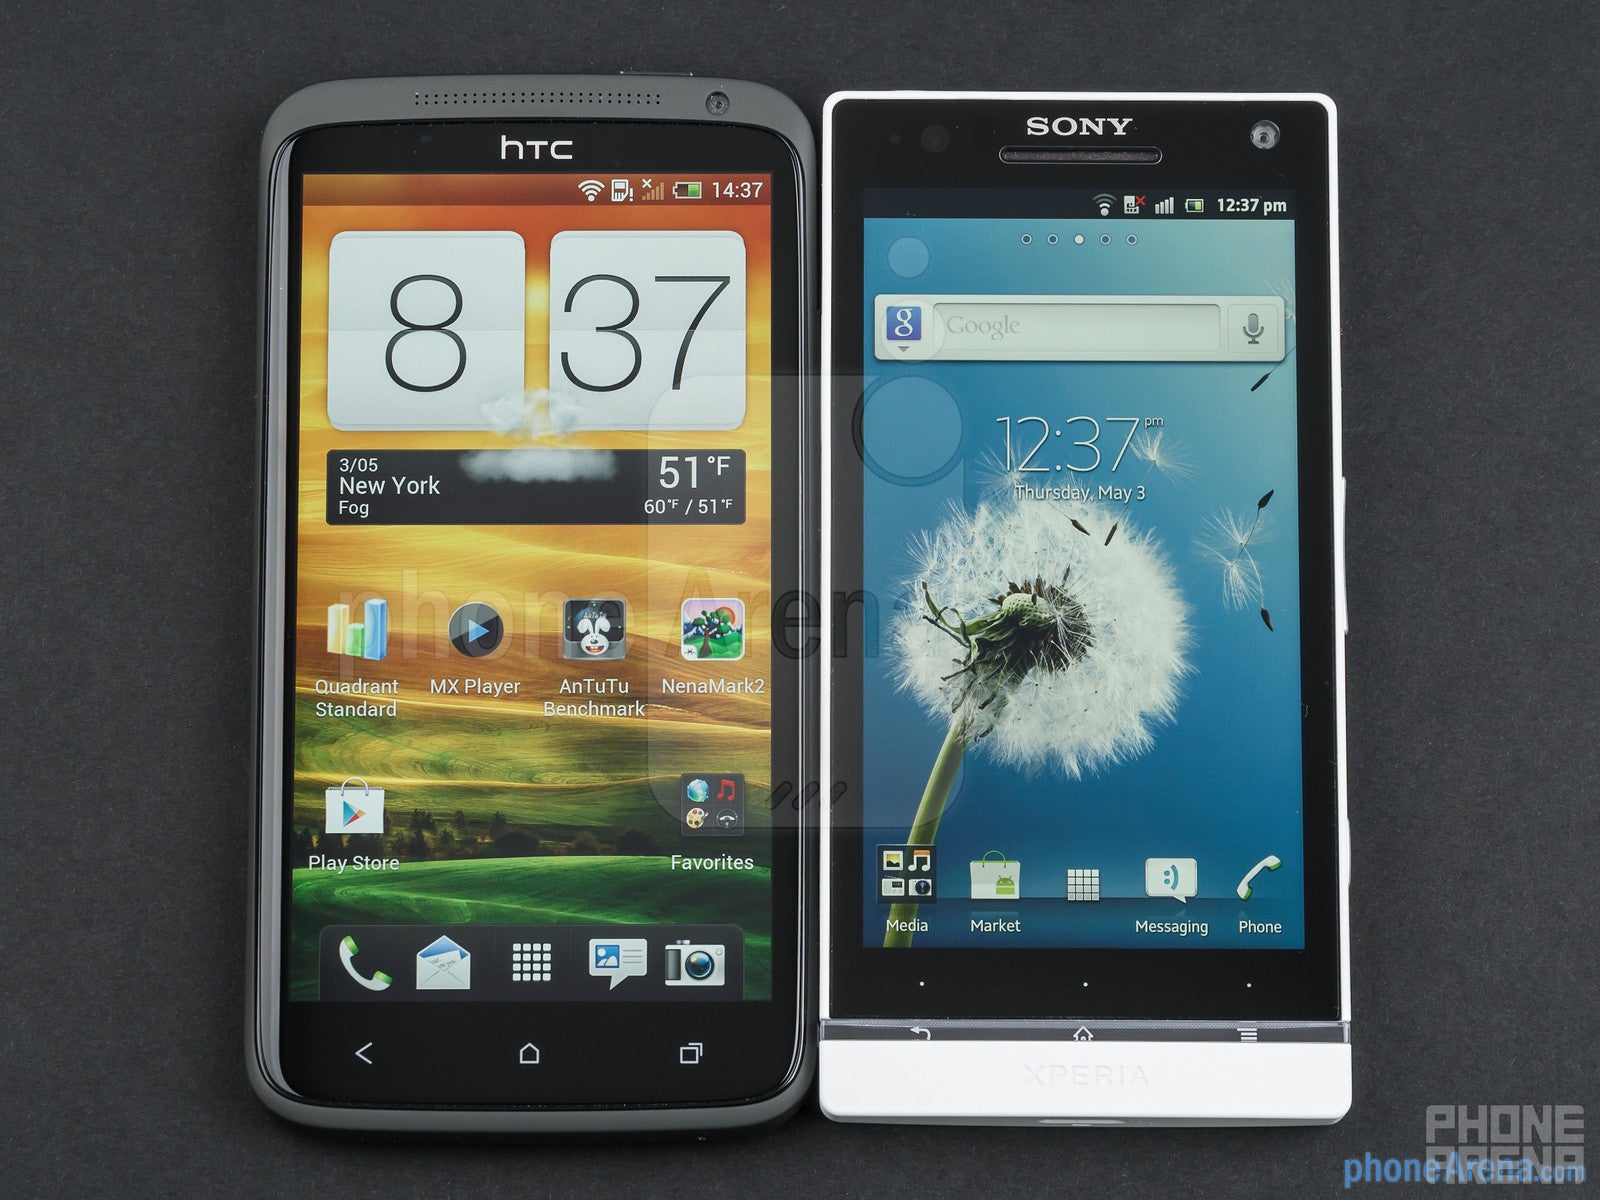 HTC One X (left) and Sony Xperia S (right) - HTC One X vs Sony Xperia S